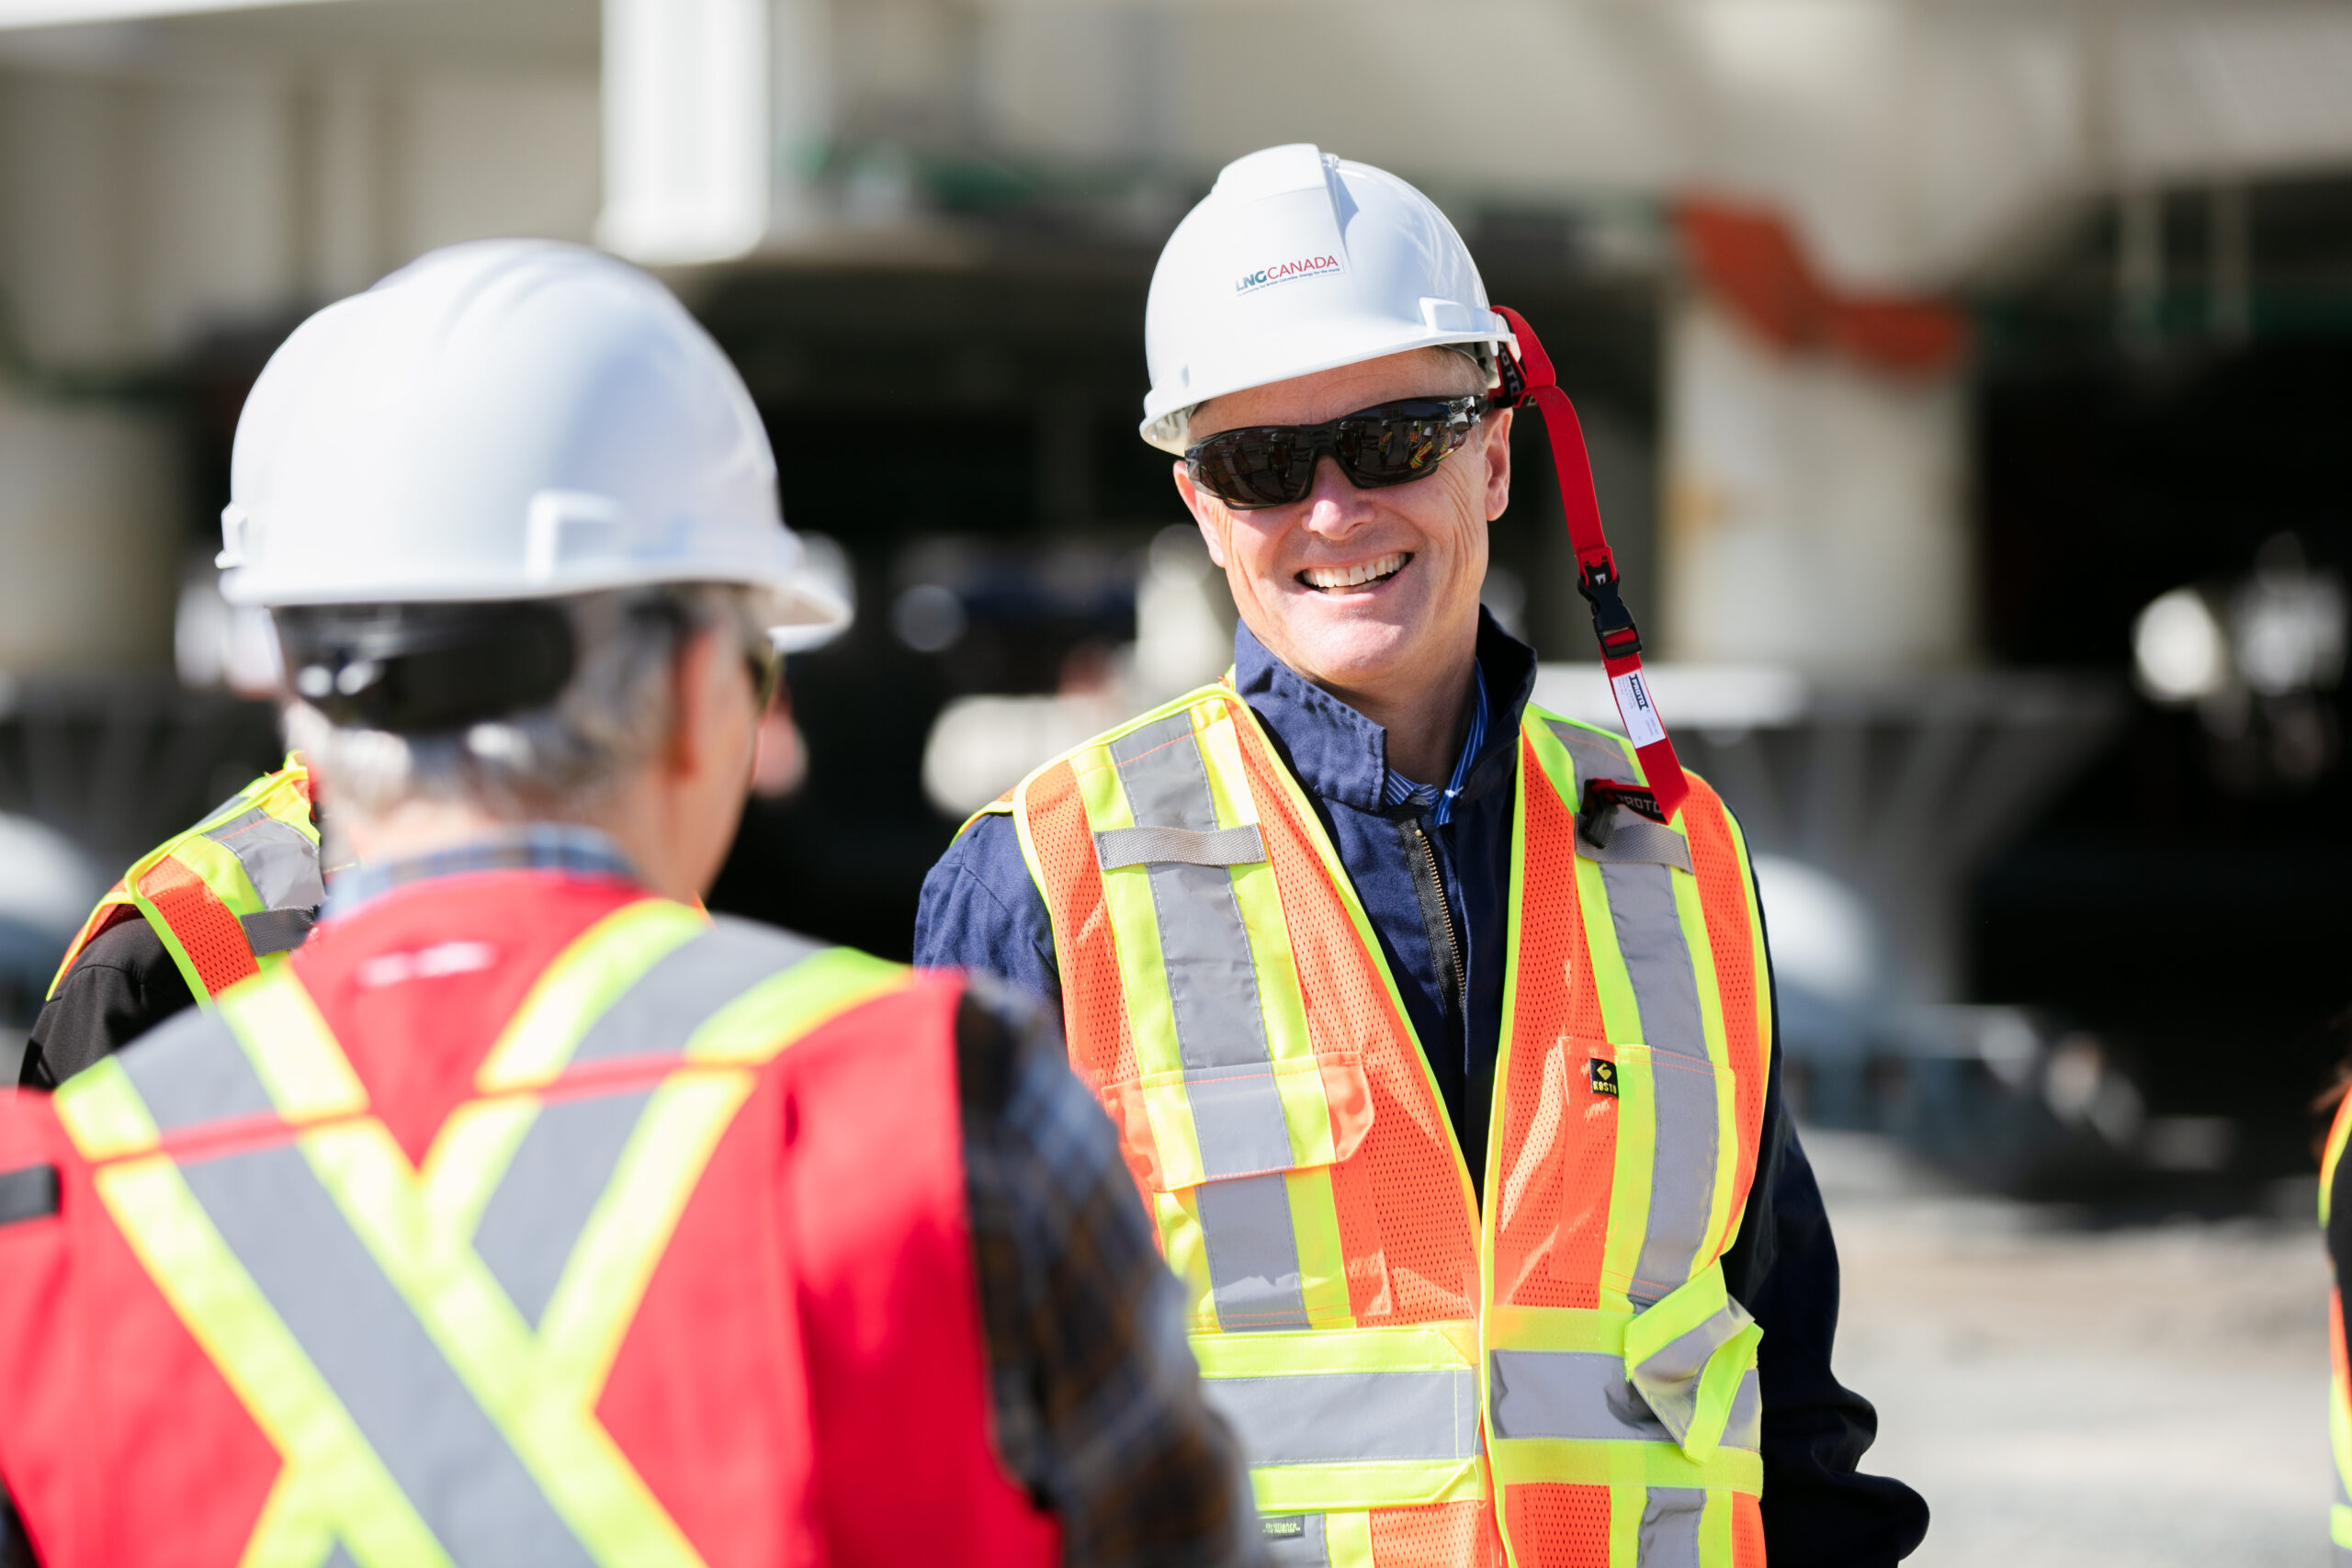 LNG Canada project employees engaging in positive conversation at work